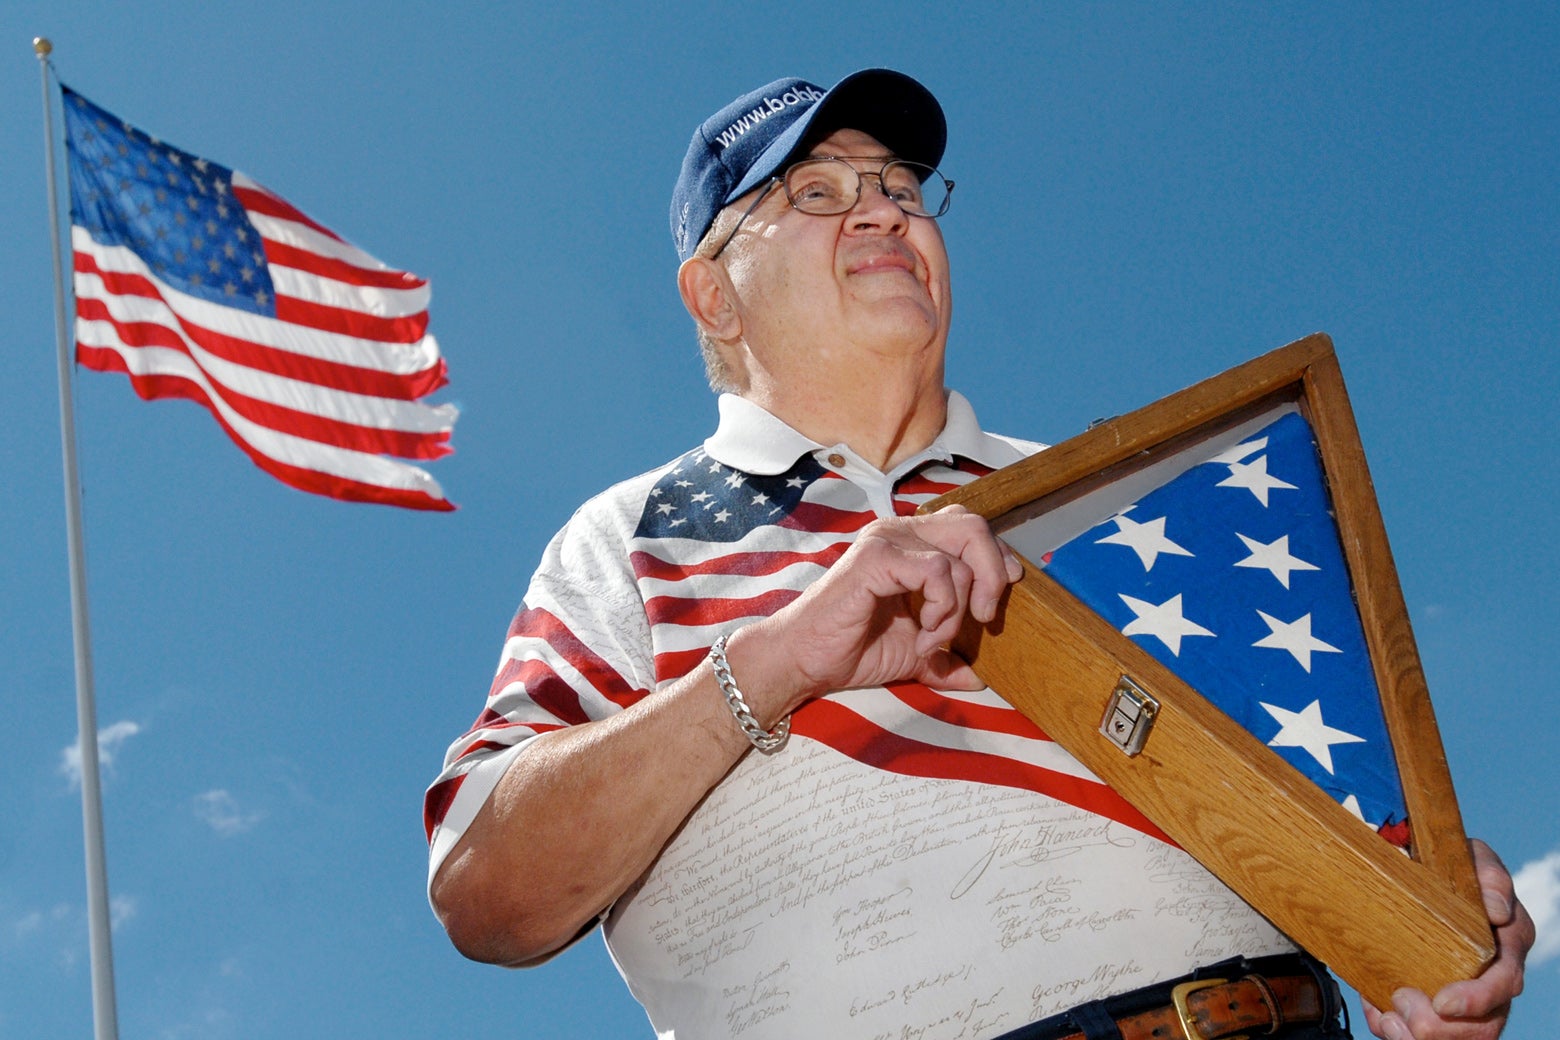 A man in a flag polo shirt holds up a flag in a wooden box. A flag also flies behind him against the blue sky.